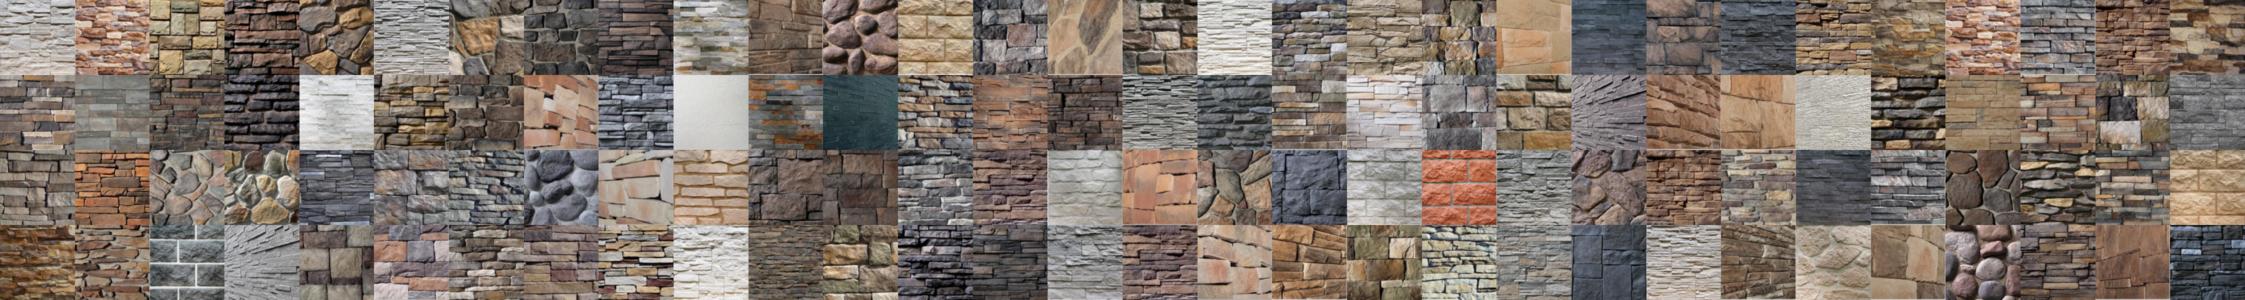 A collage of stone-siding